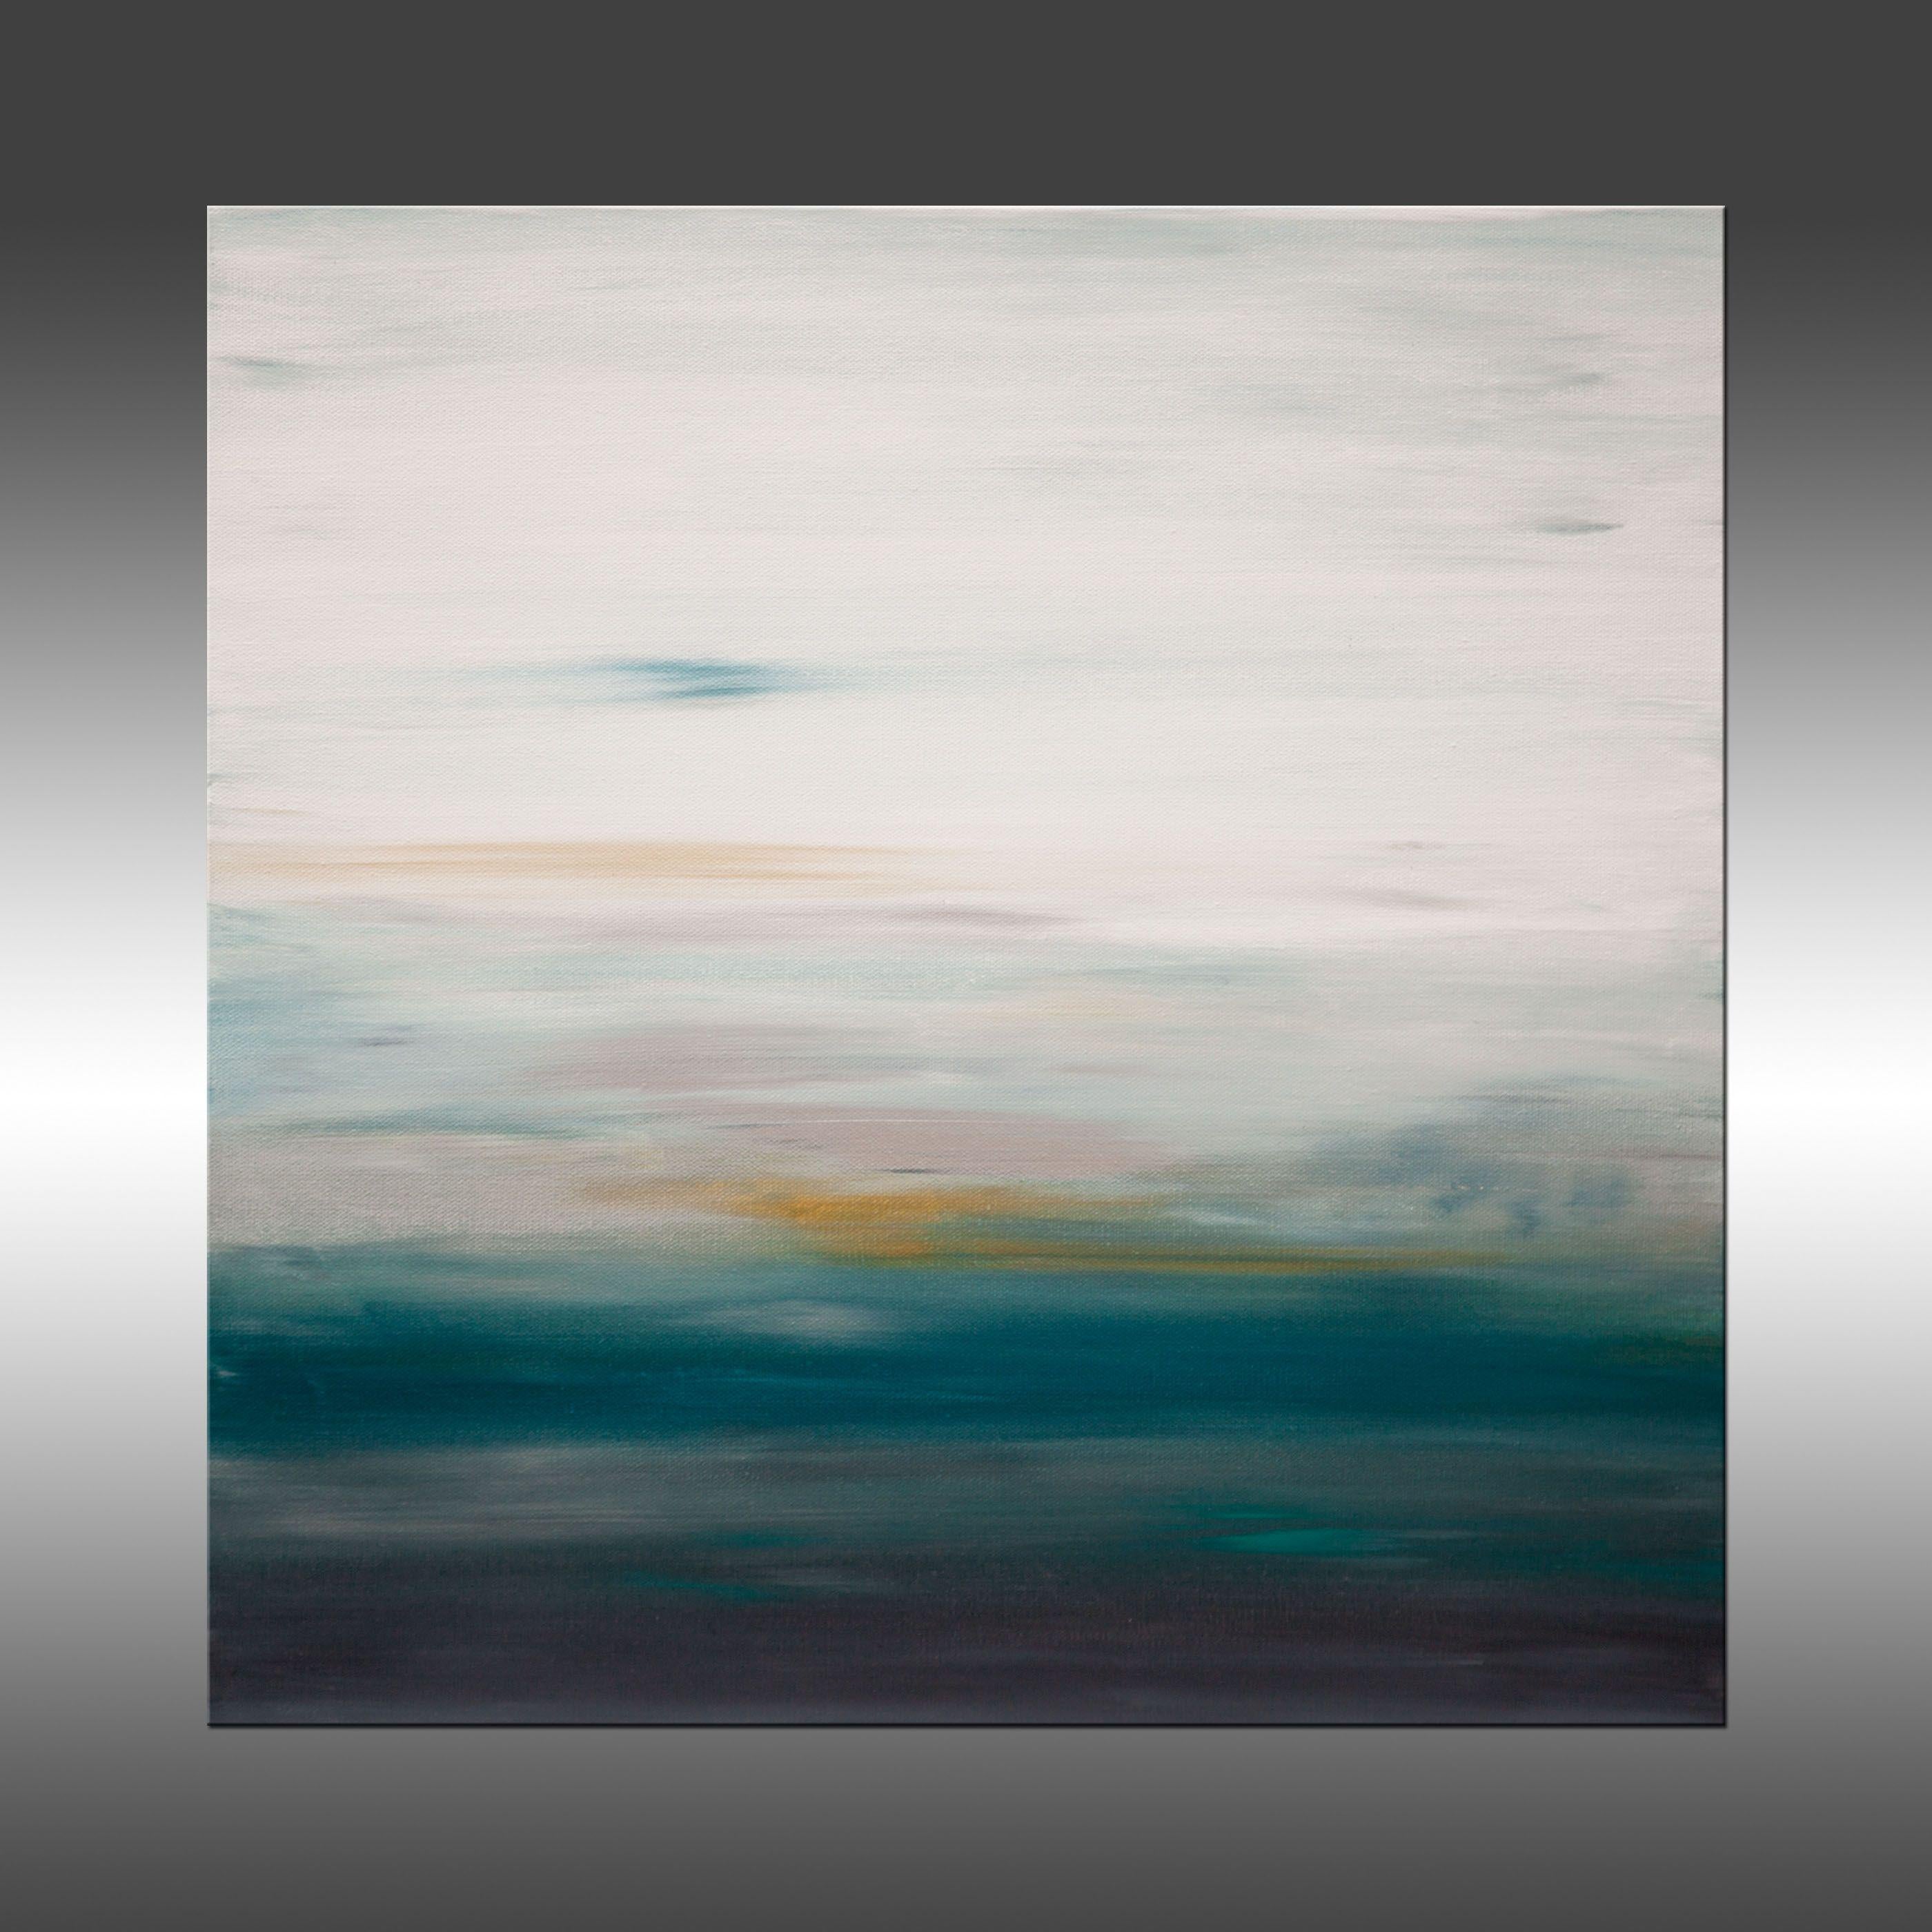 Sunset 65 is an original painting, created with acrylic paint on gallery-wrapped canvas. It has a width of 20 inches and a height of 20 inches with a depth of 1.5 inches (20x20x1.5).     The colors used in the painting are white, blue, grey, teal,